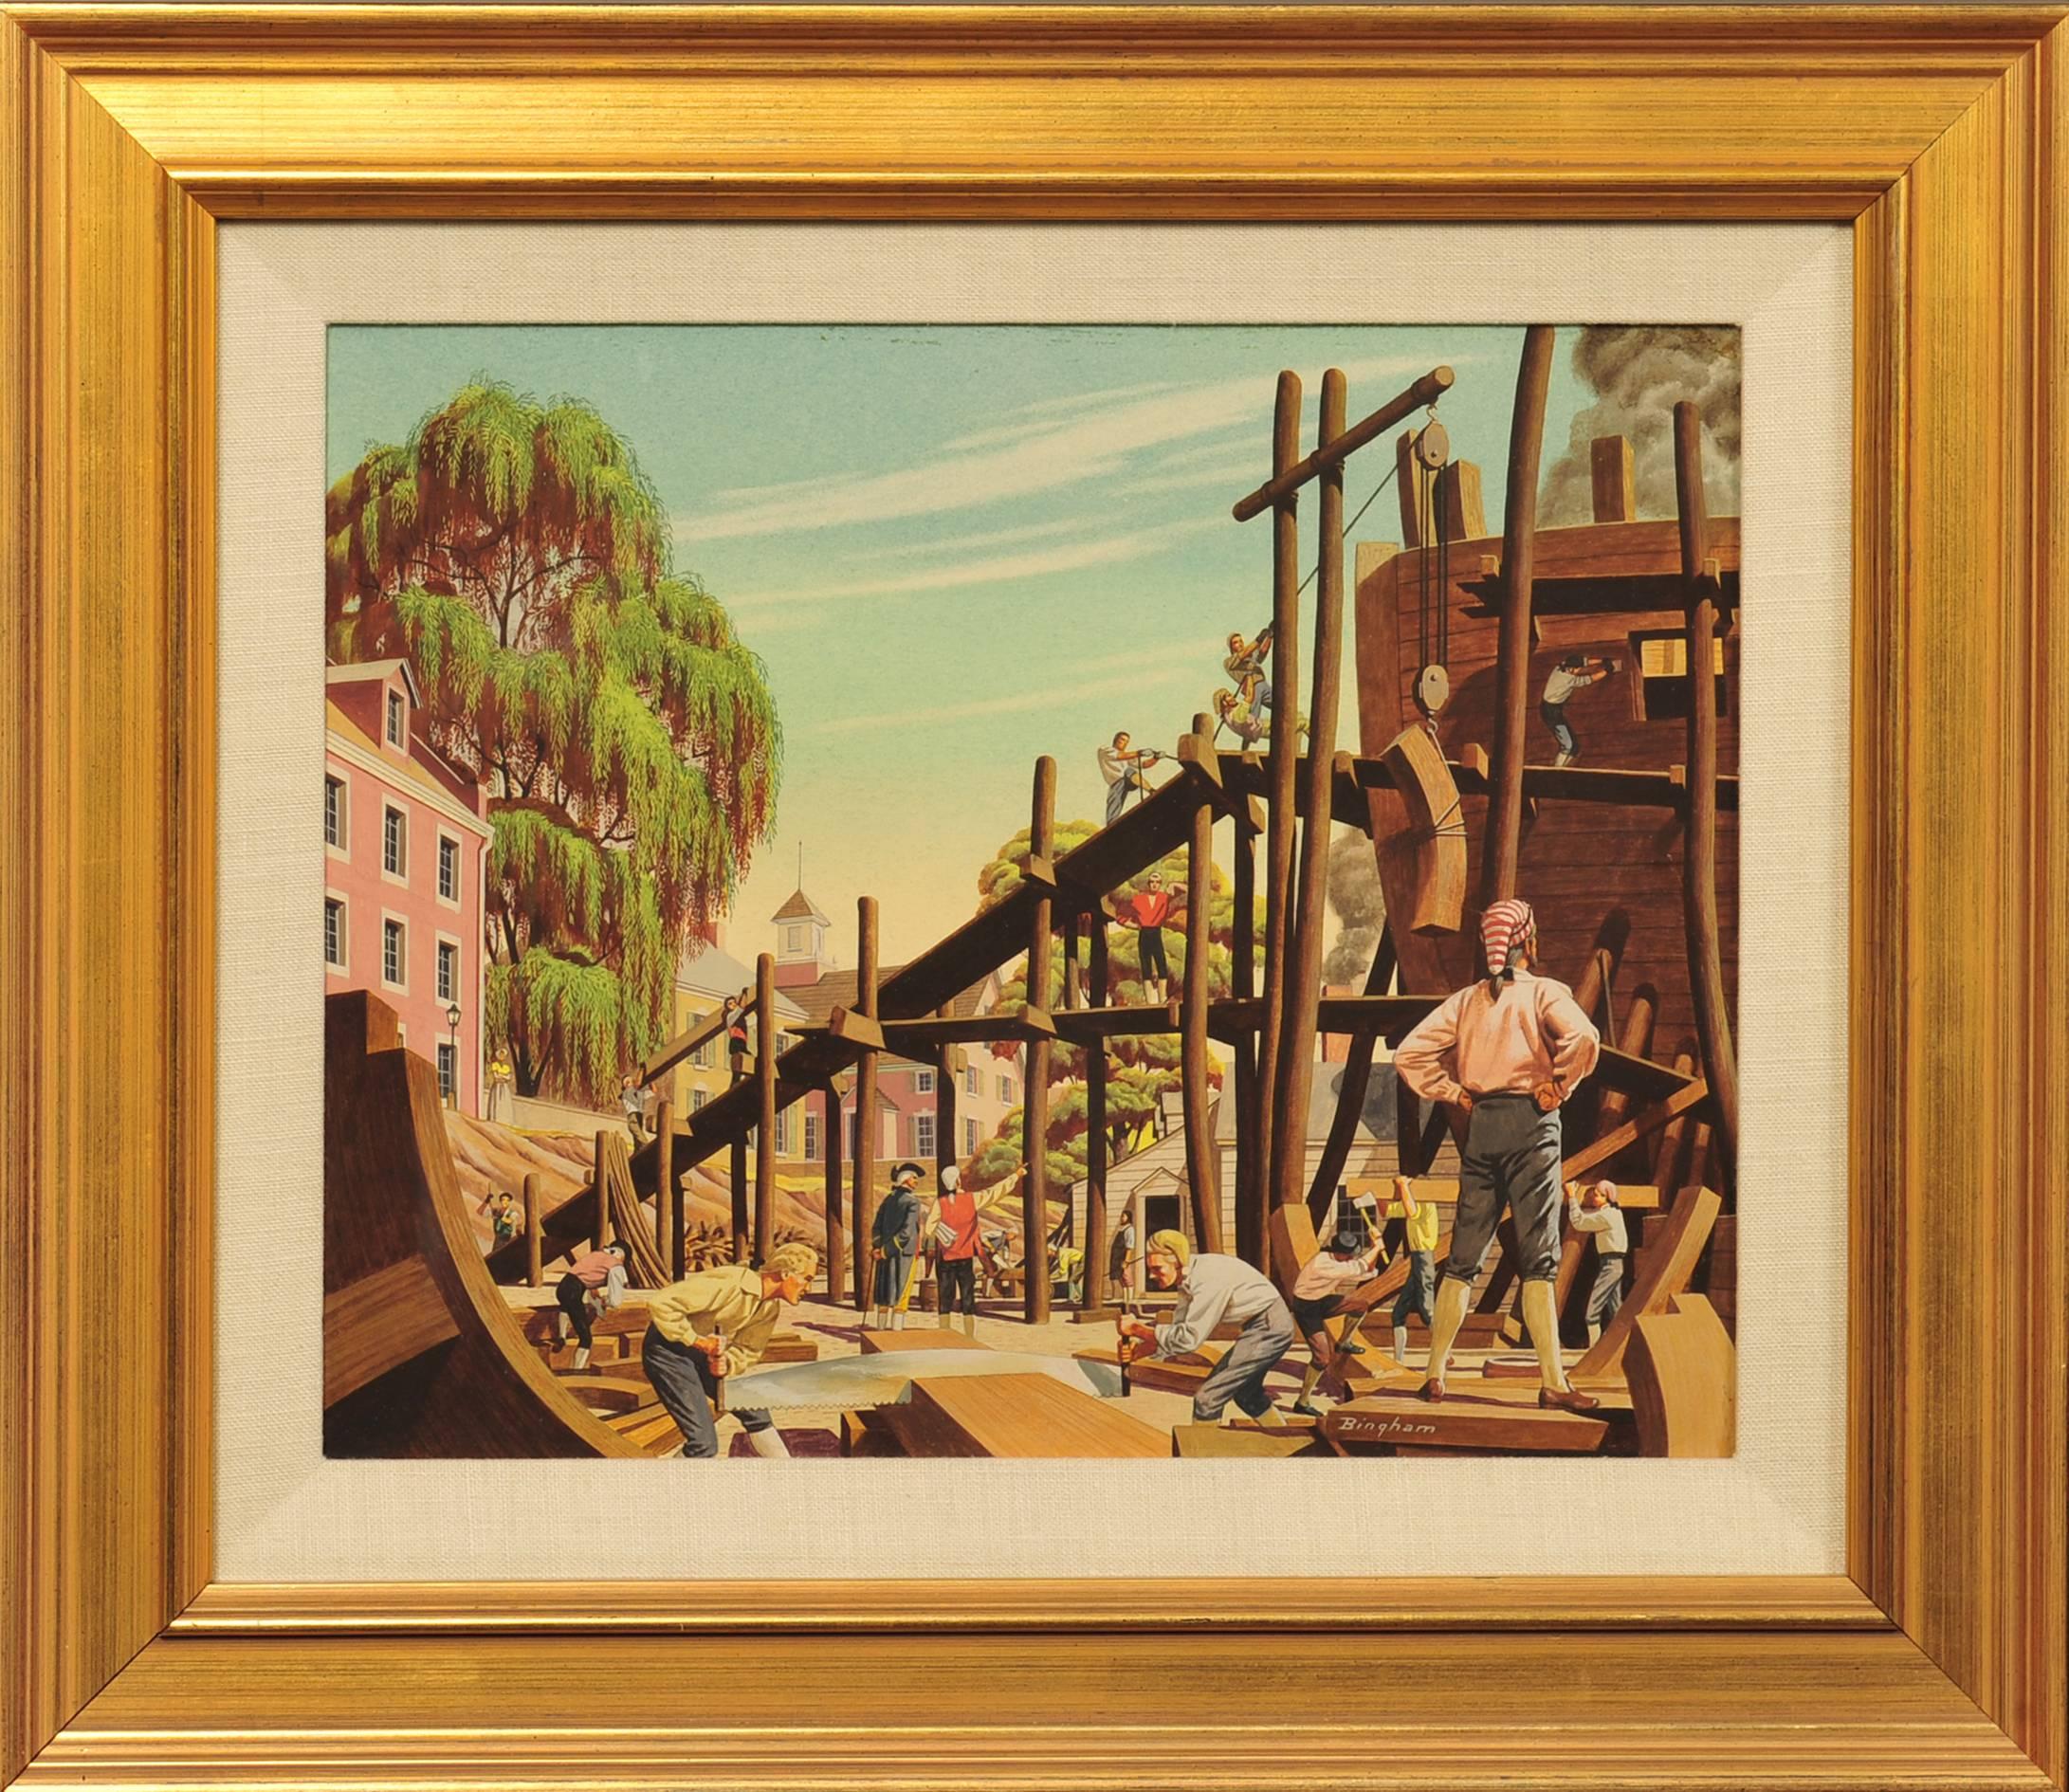 Shipbuilding in Philadelphia - Other Art Style Painting by Unknown